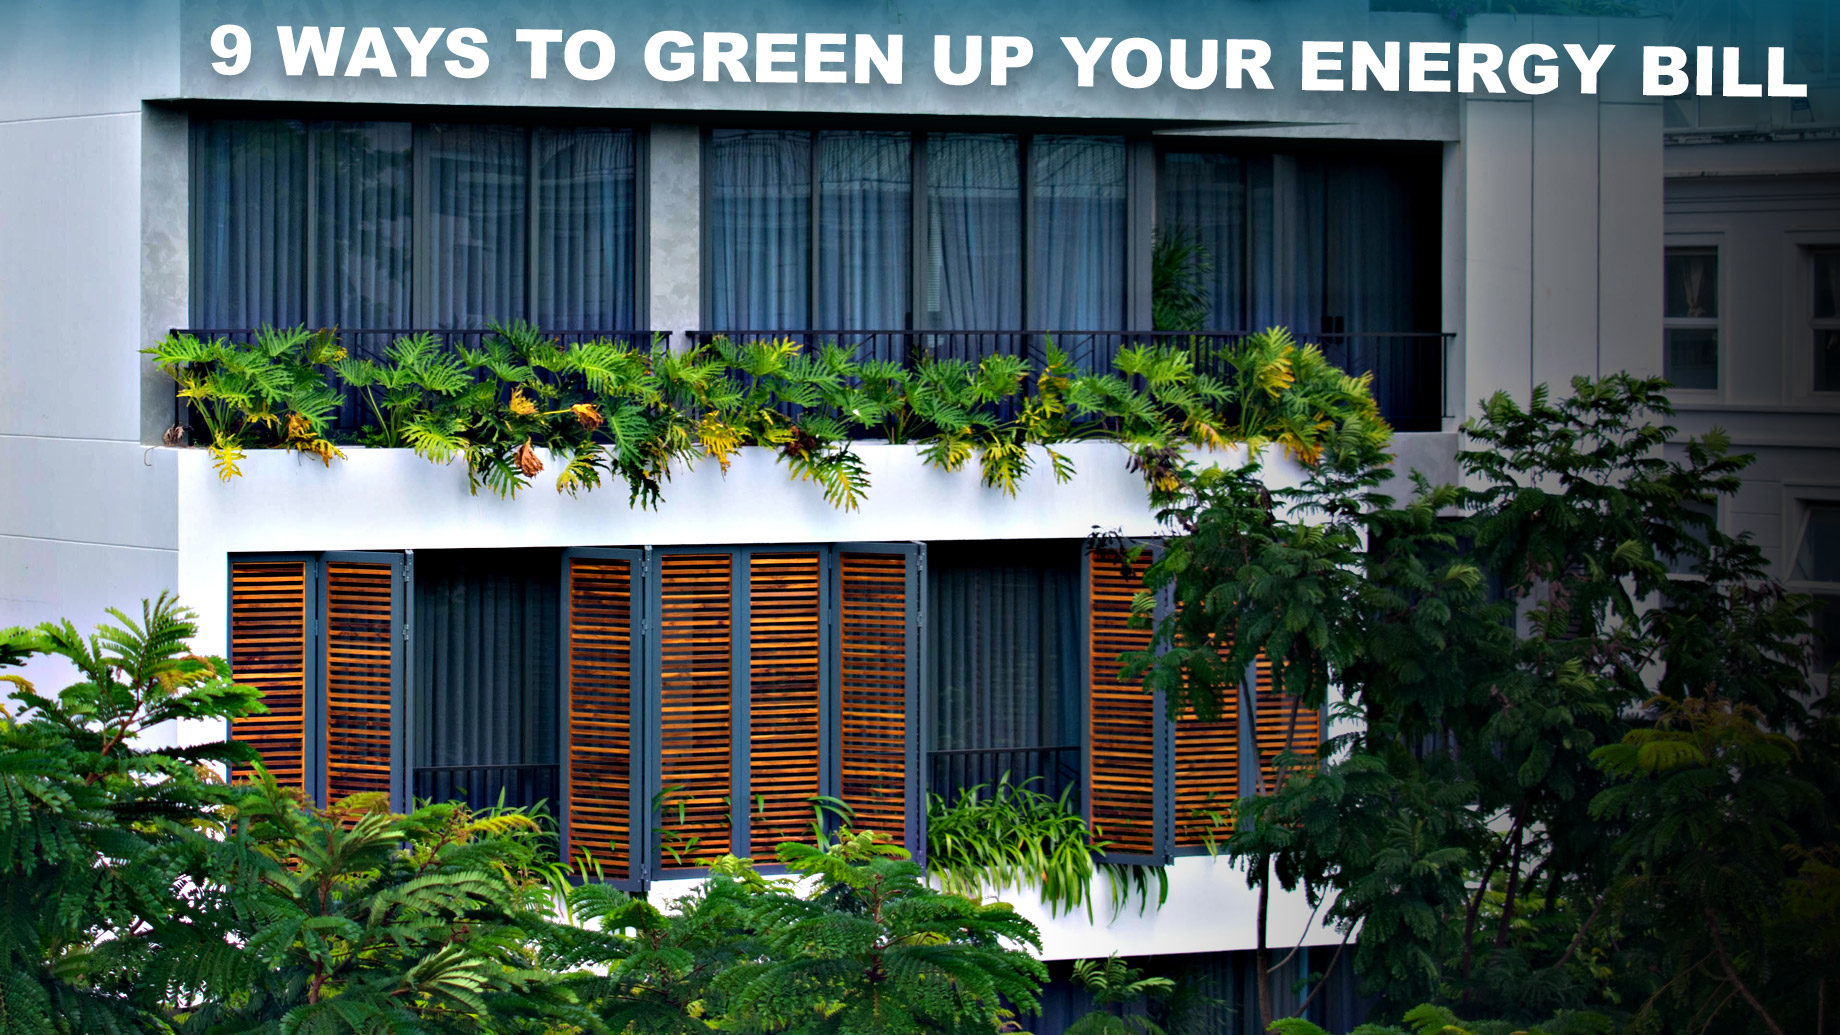 9 Ways to Green Up Your Energy Bill